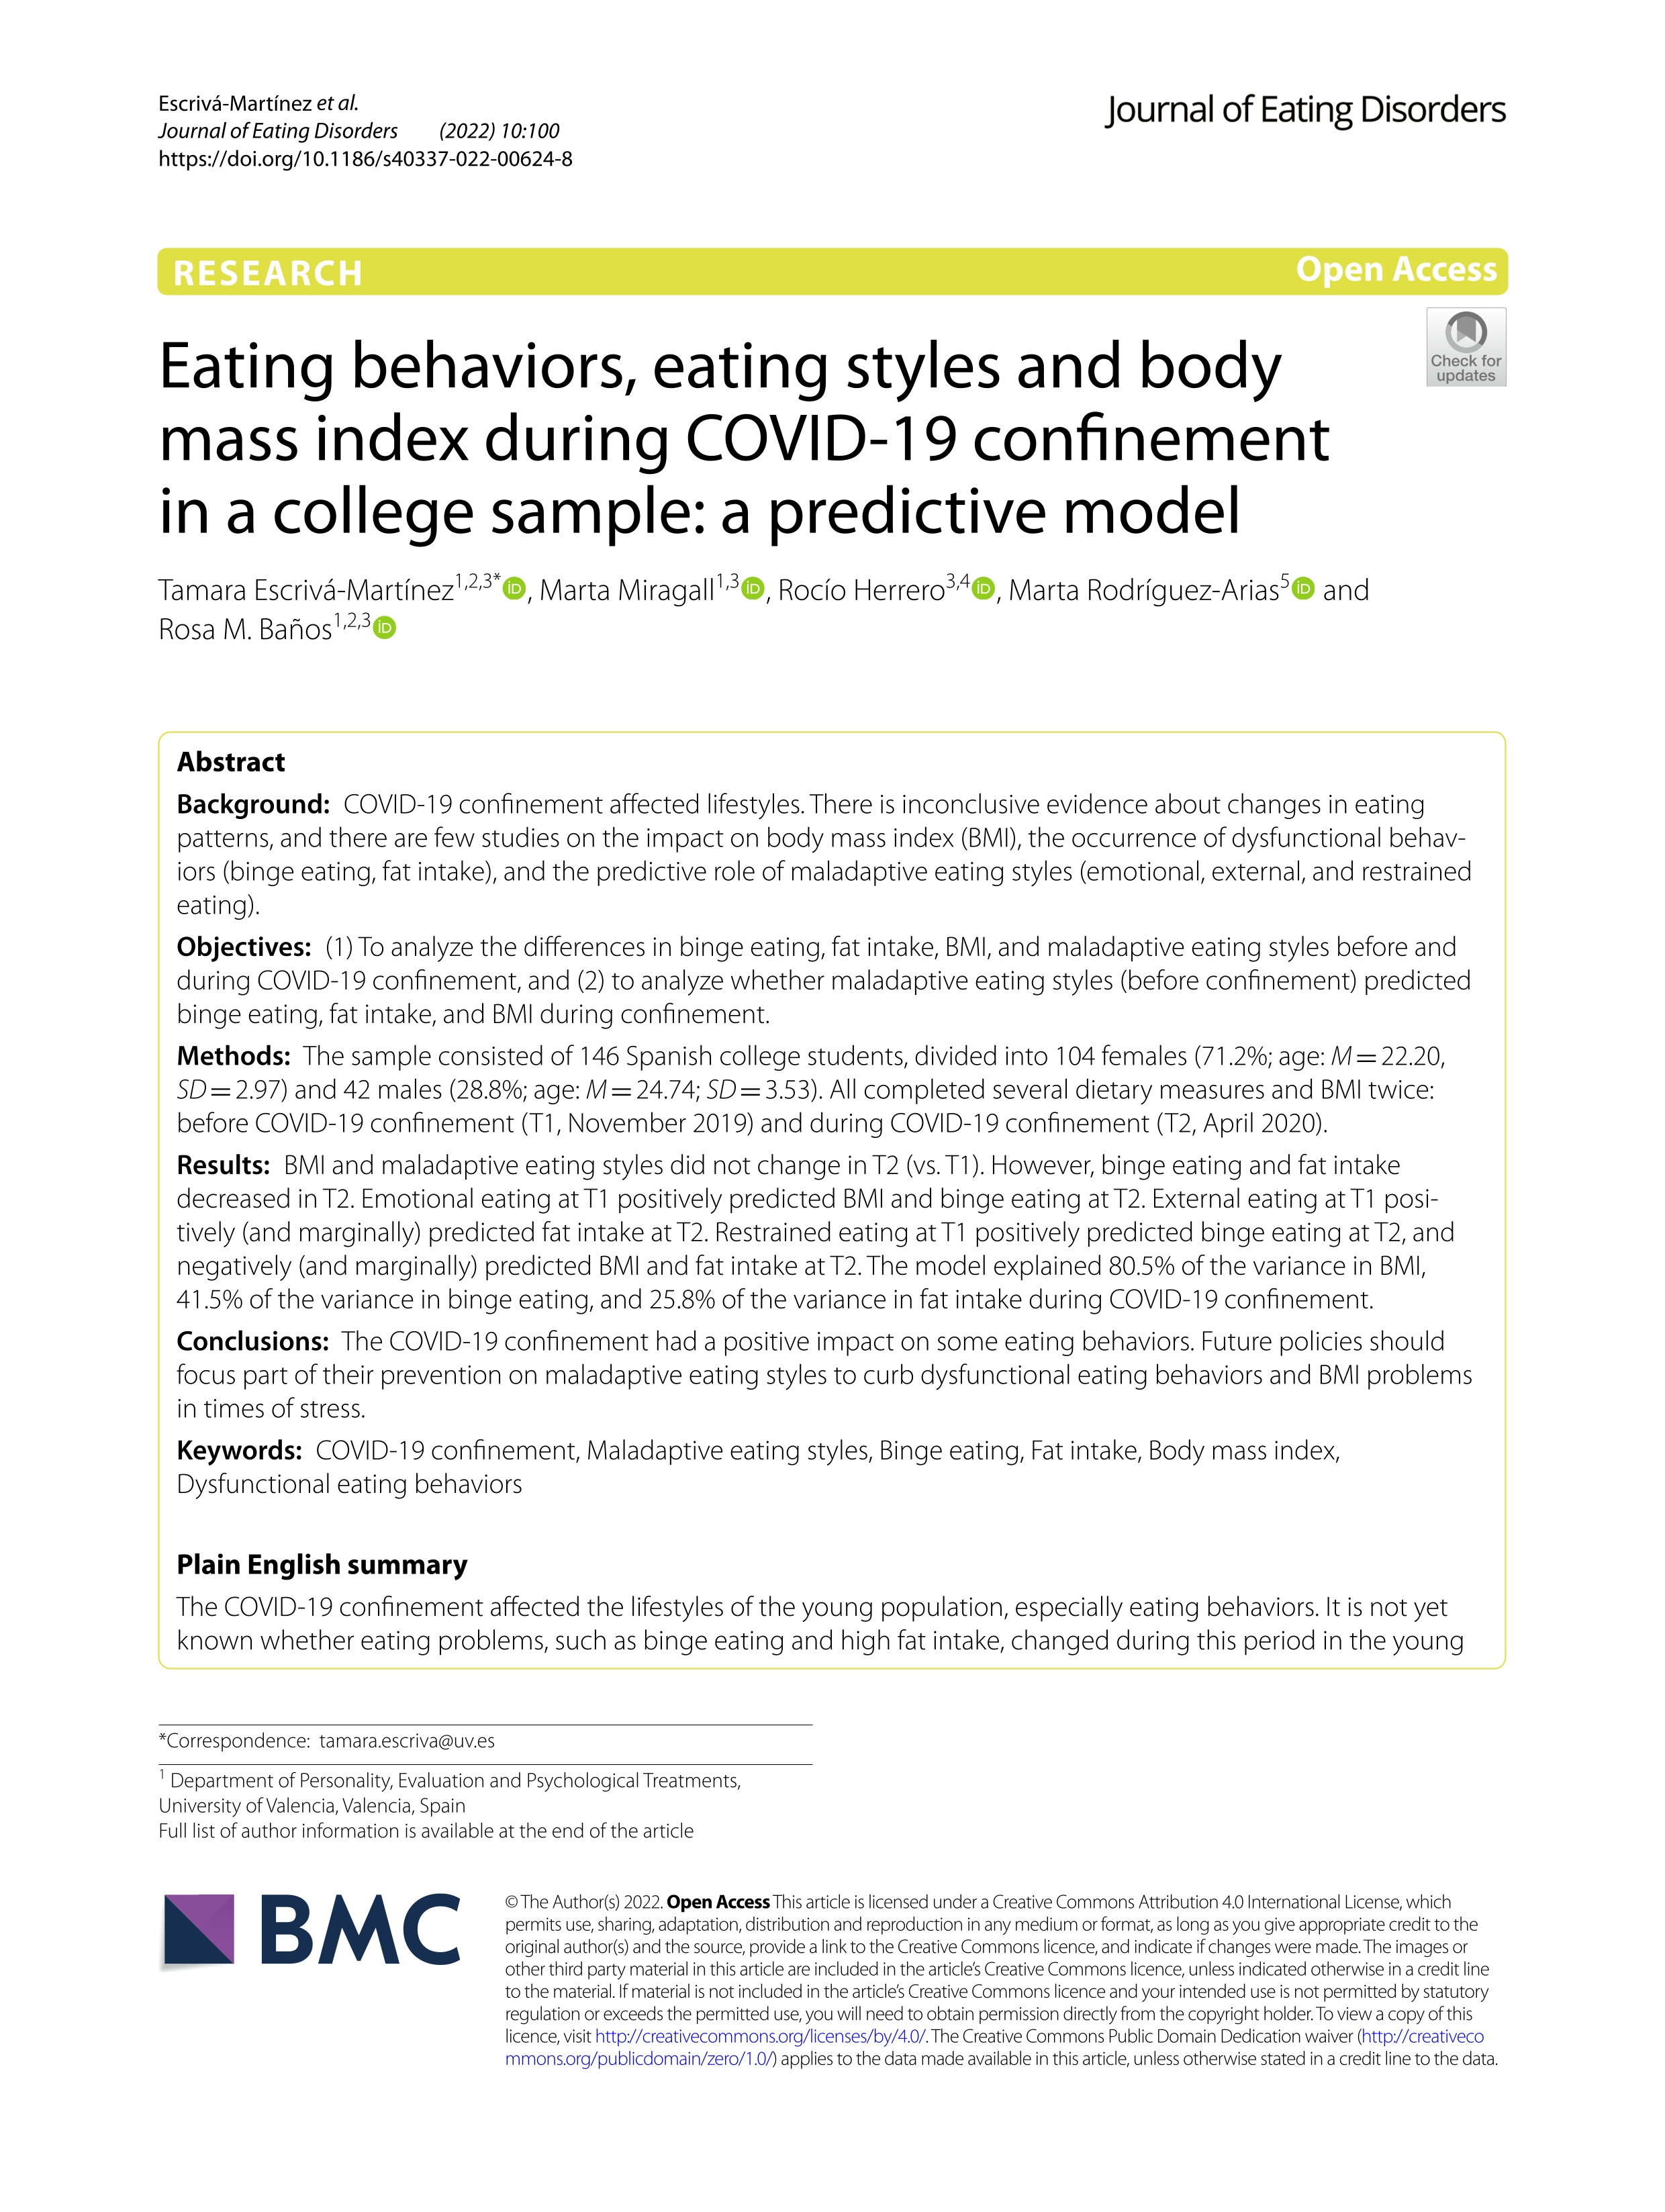 Eating behaviors, eating styles and body mass index during COVID-19 confinement in a college sample: a predictive model